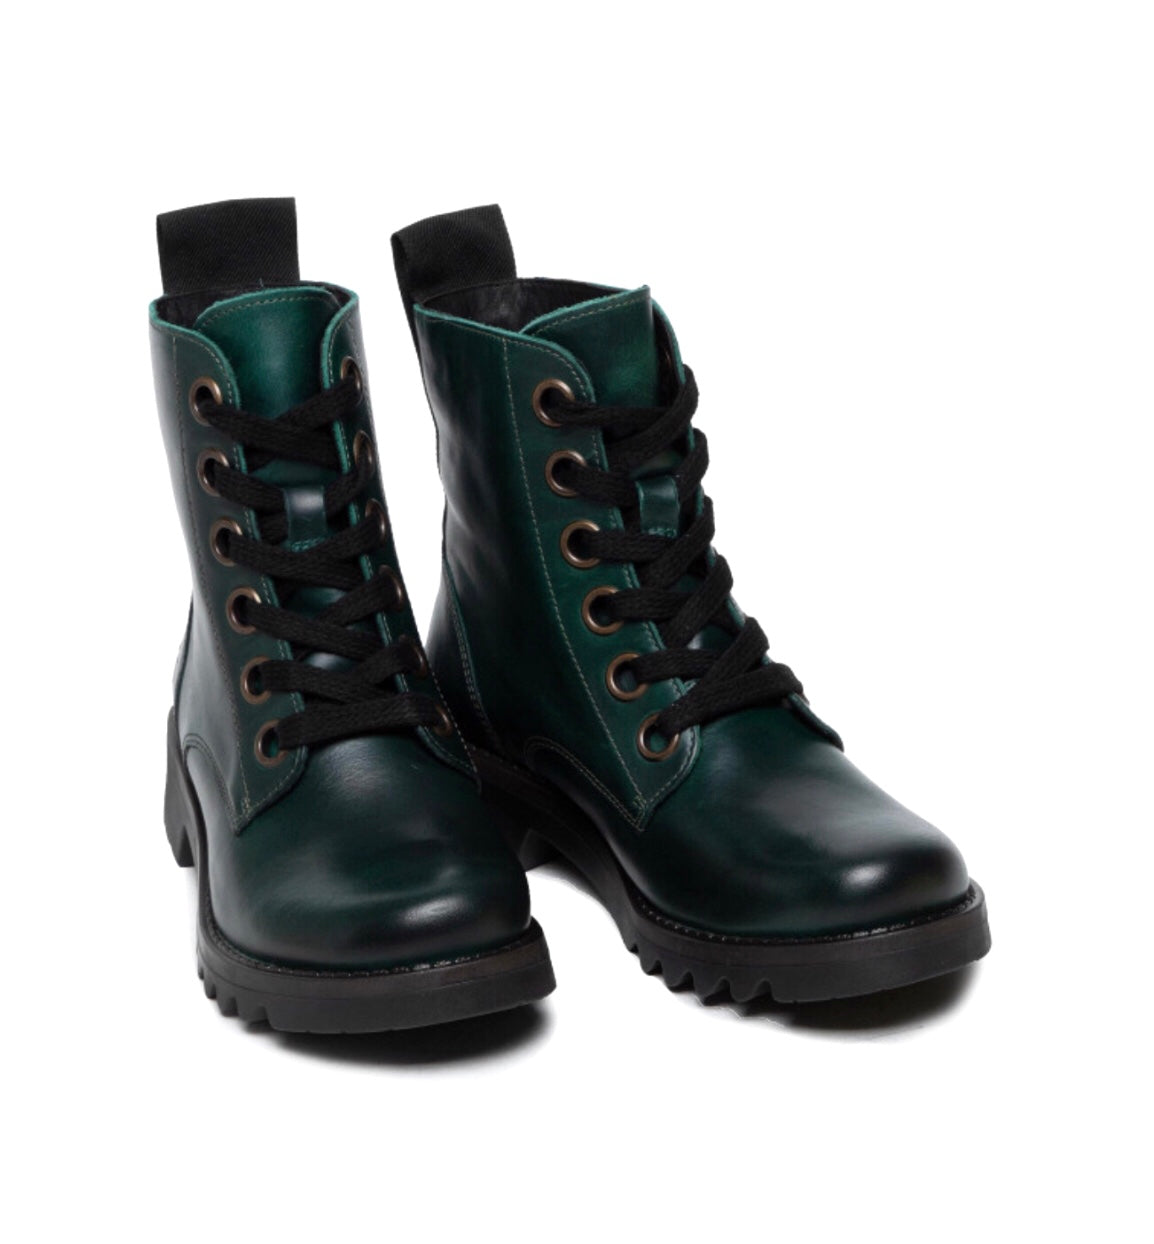 Fly London Ragi539Fly Shamrock Green 6 Eyelet Ankle Boot Made In Portugal